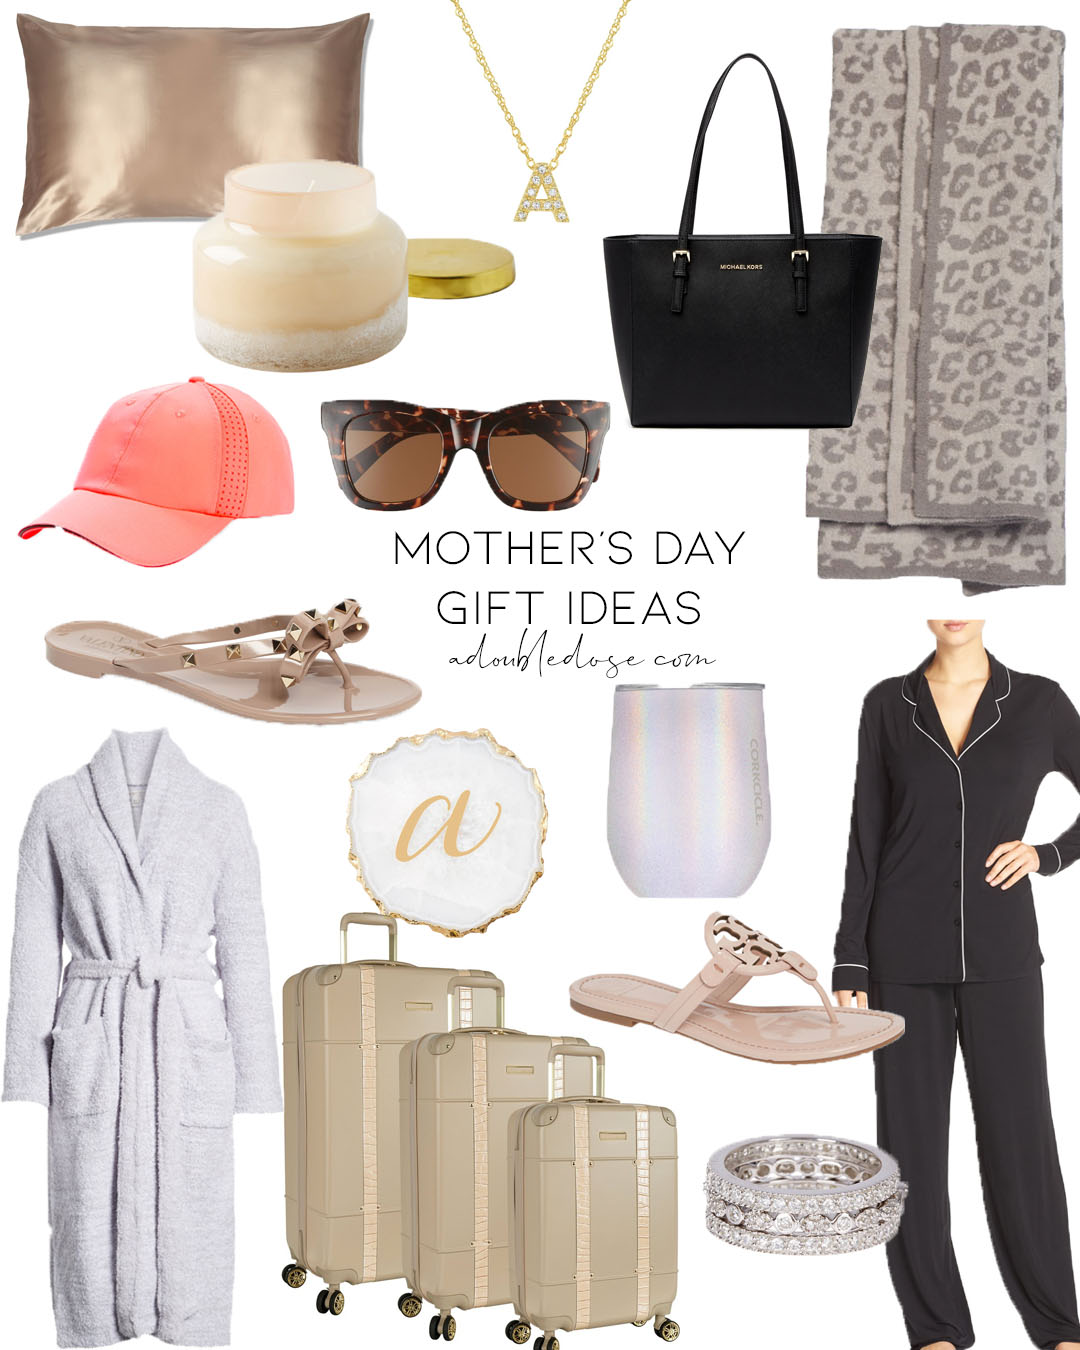 lifestyle and fashion bloggers alexis and samantha belbel share their top and best picks for mother's day gift ideas that are affordable, on amazon, and for any mom from jewelry to luggage to robes and more.